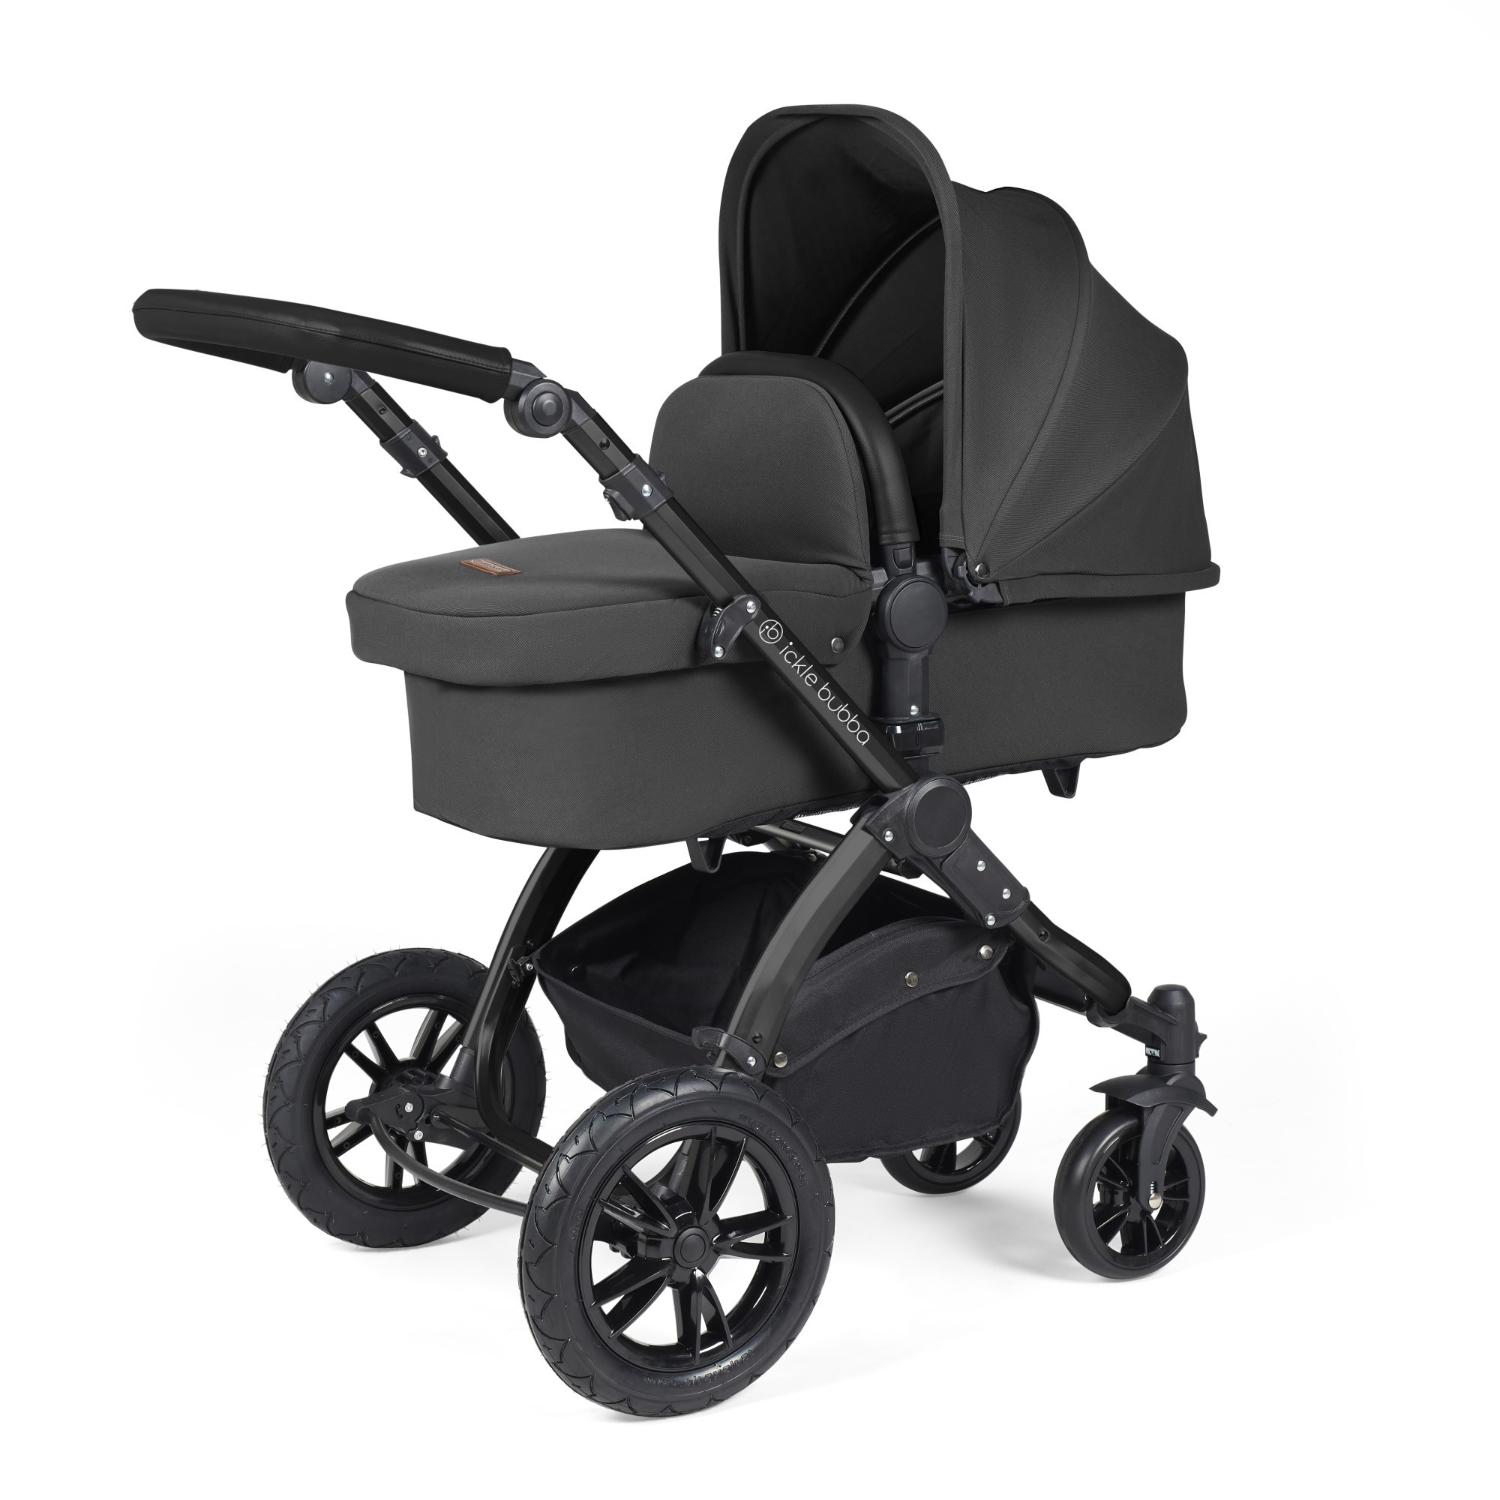 Ickle Bubba Stomp Luxe Pushchair with carrycot attached in Charcoal Grey colour